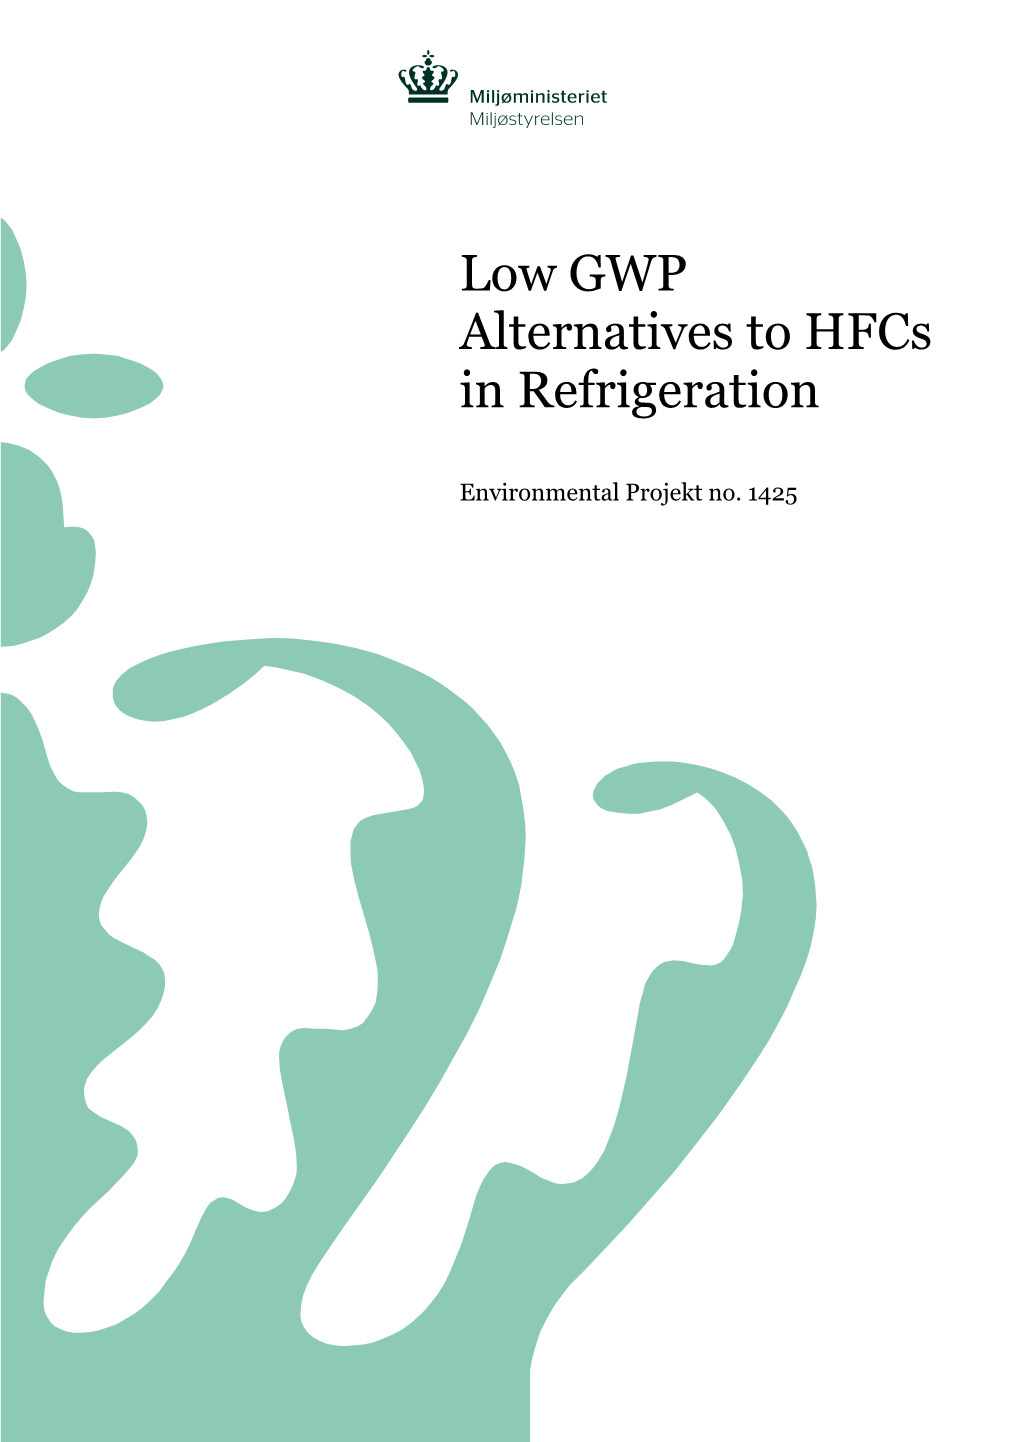 Denmark: Low GWP Alternatives to Hfcs in Refrigeration